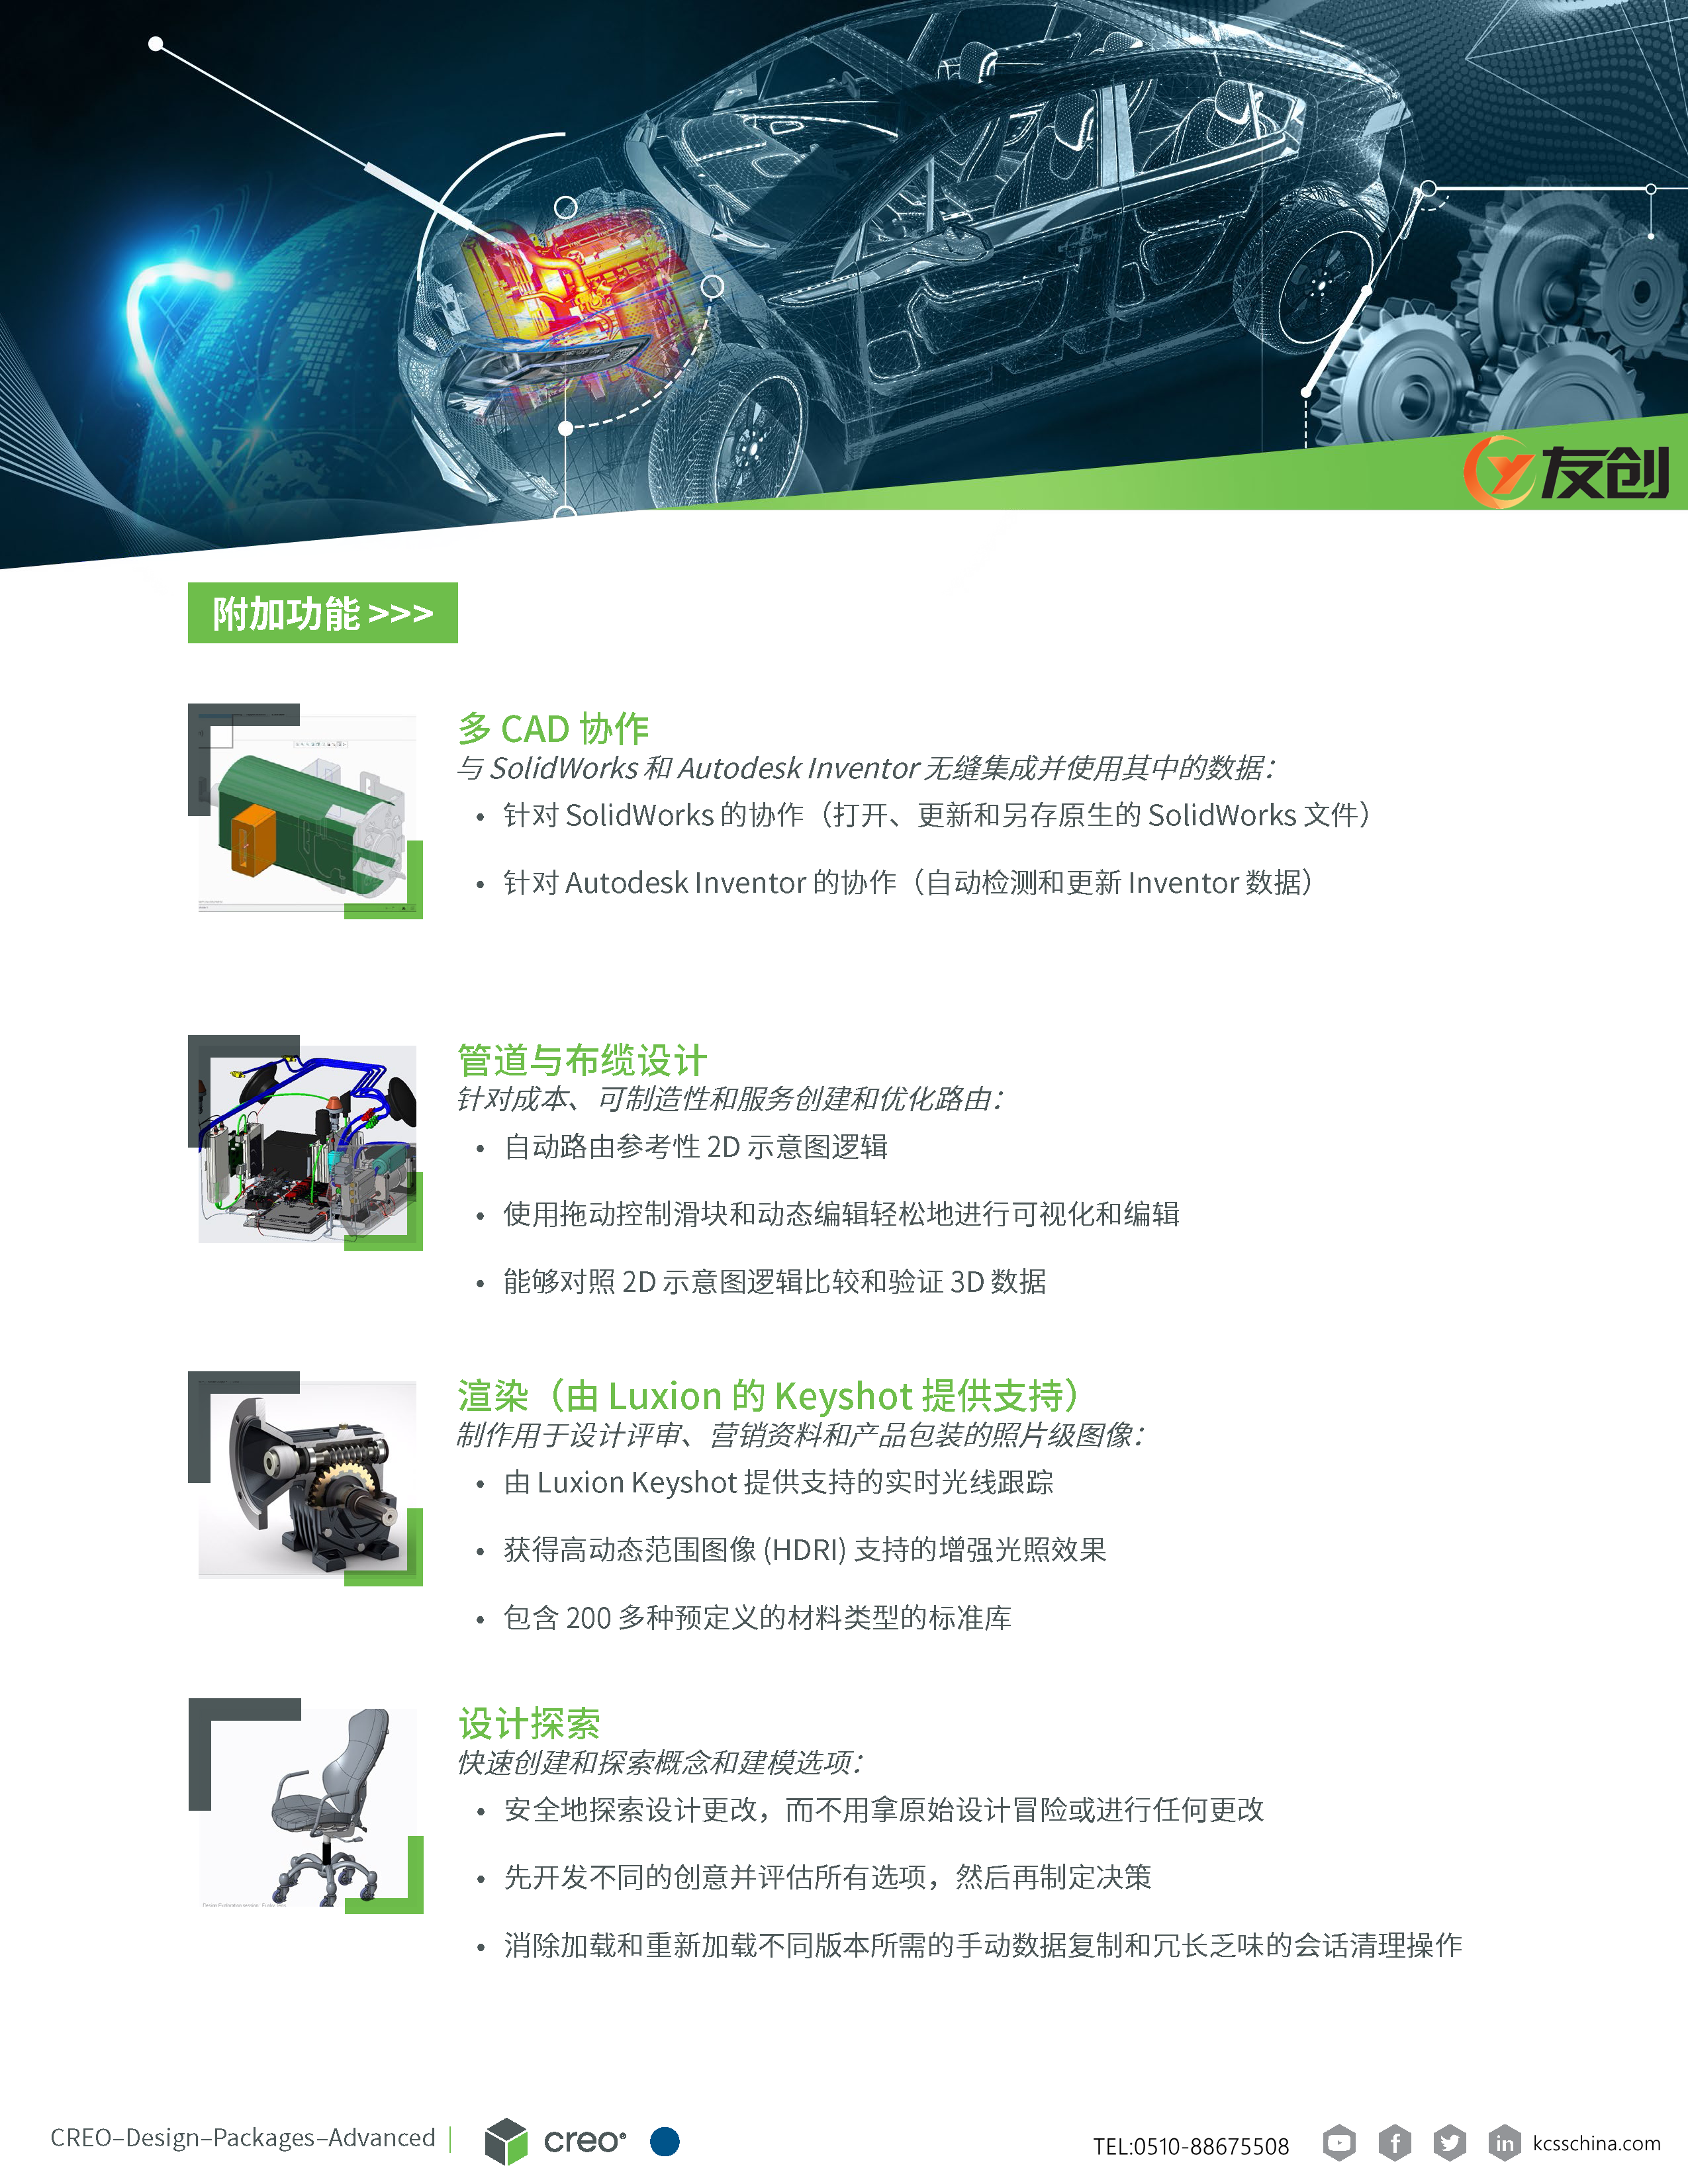 Creo Design Advanced Brochure (Simplified Chinese)_页面_3_副本.png